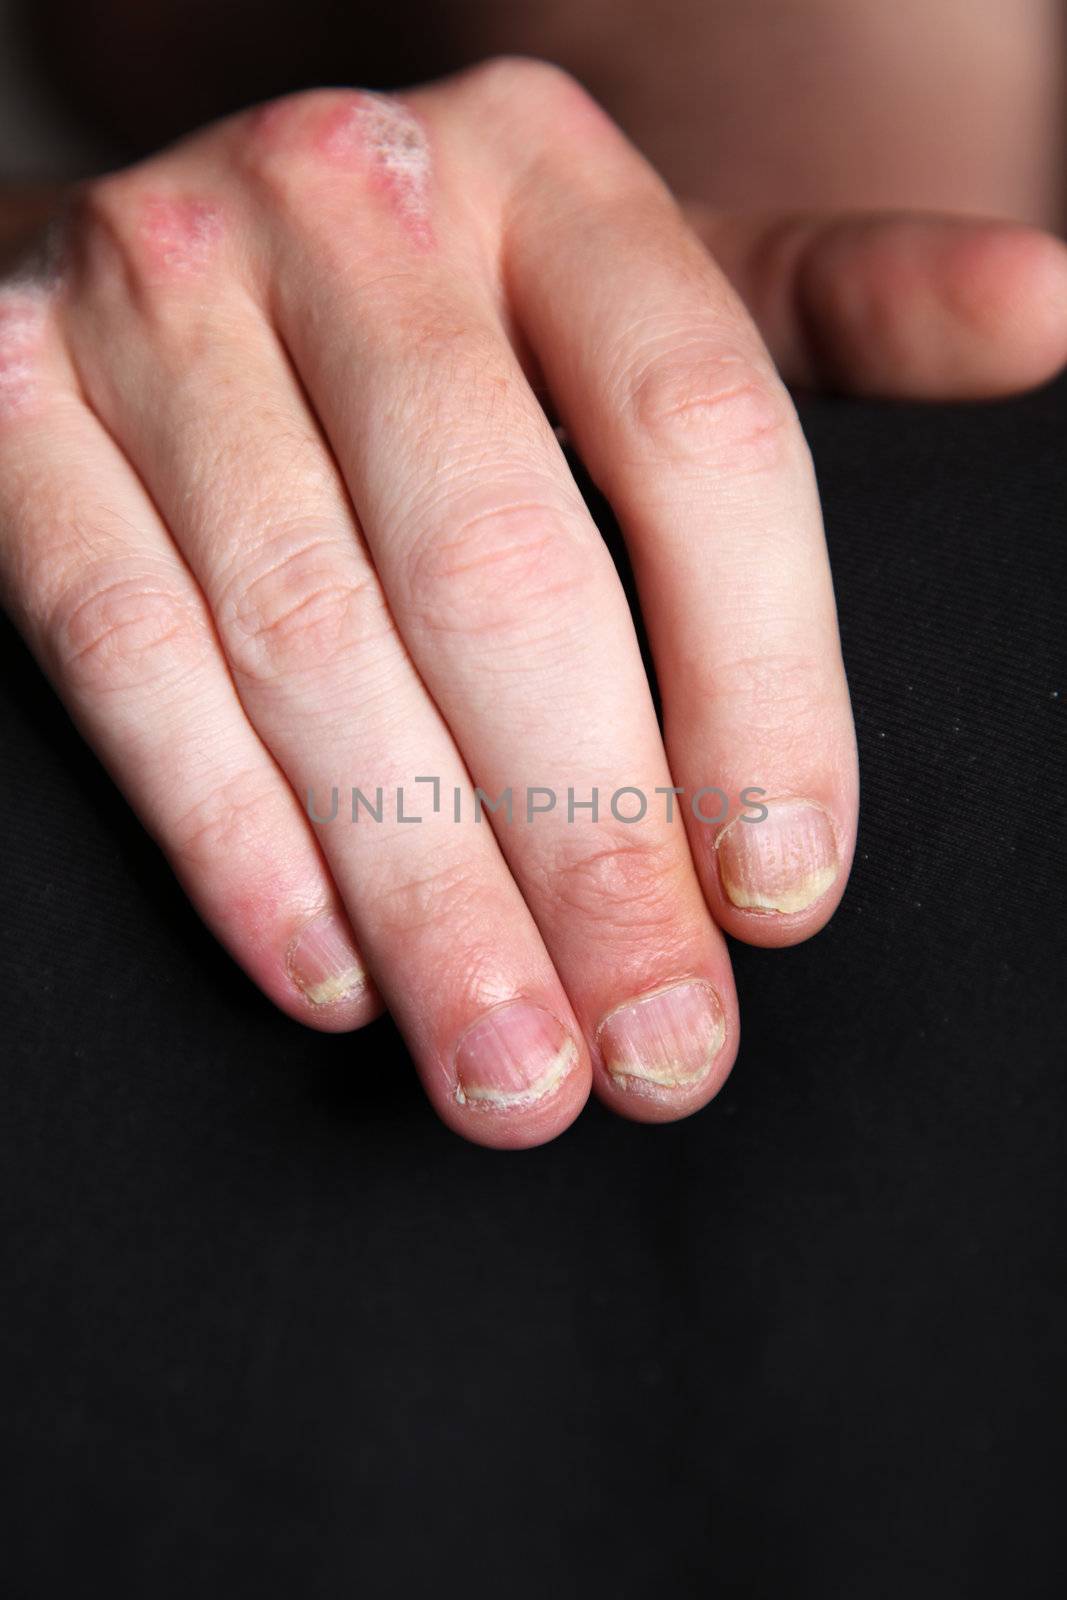 Nahaufnahme-Severe psoriasis - psoriasis of the fingernails and the hand - close up
